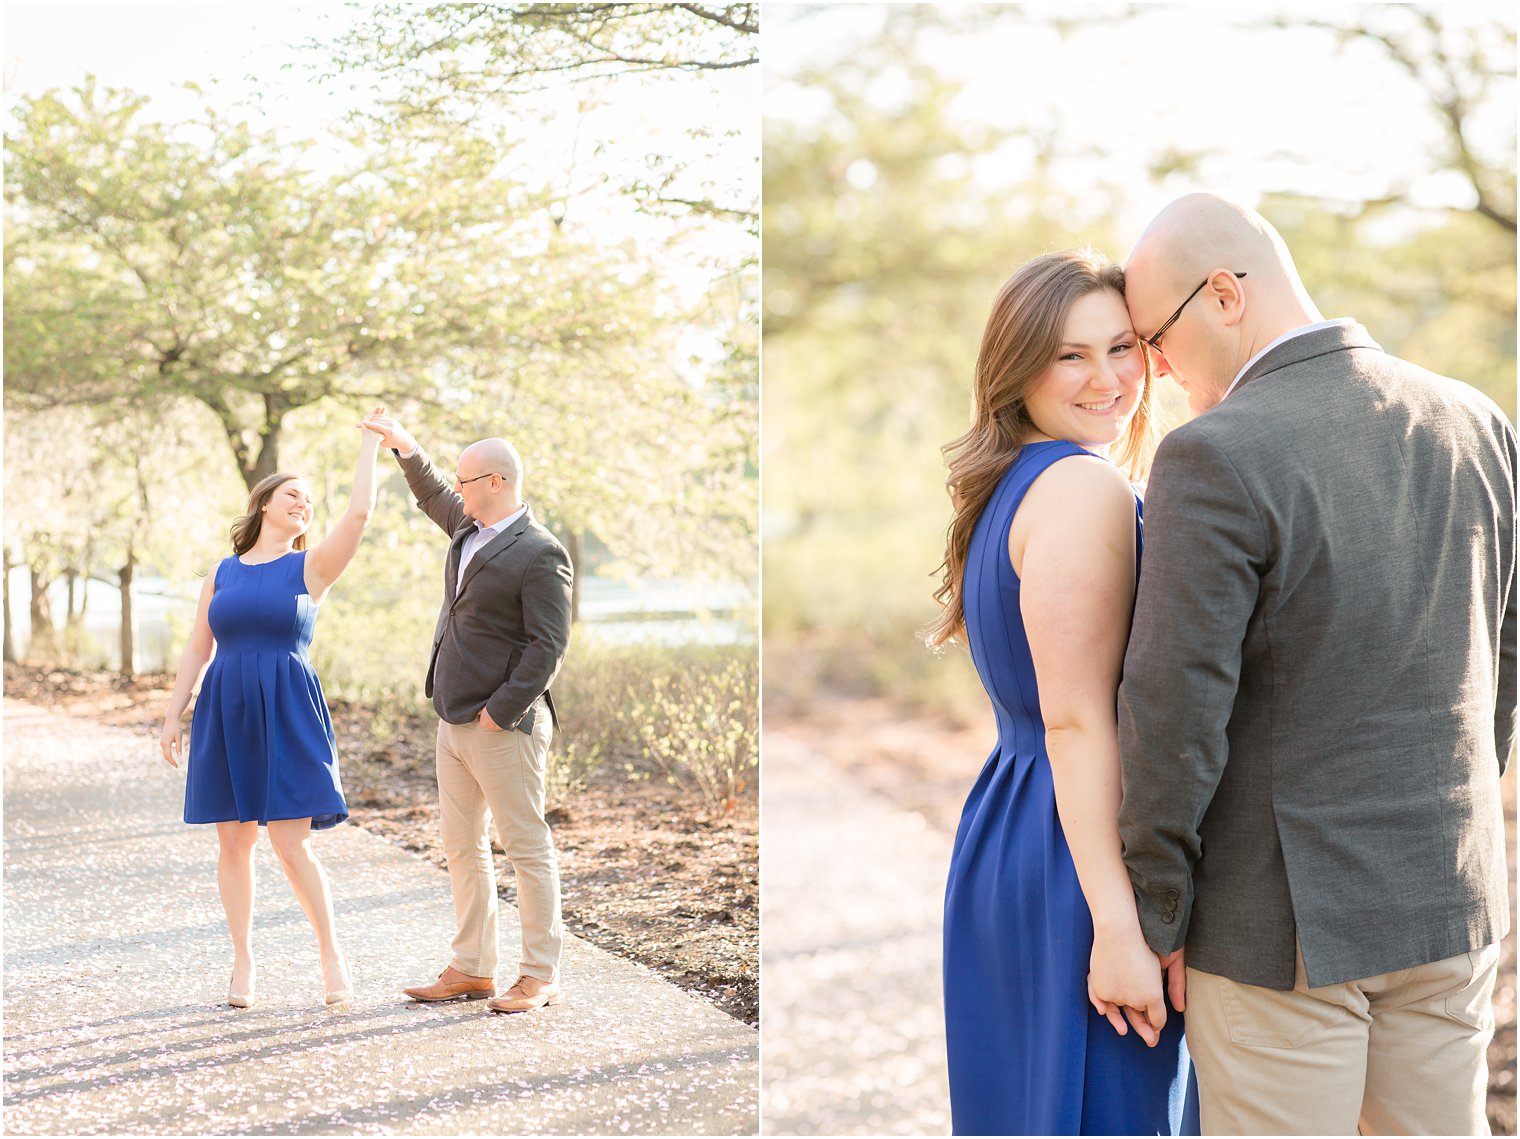 Engaged couple dancing in a tree-lined path at Branch Brook Park 